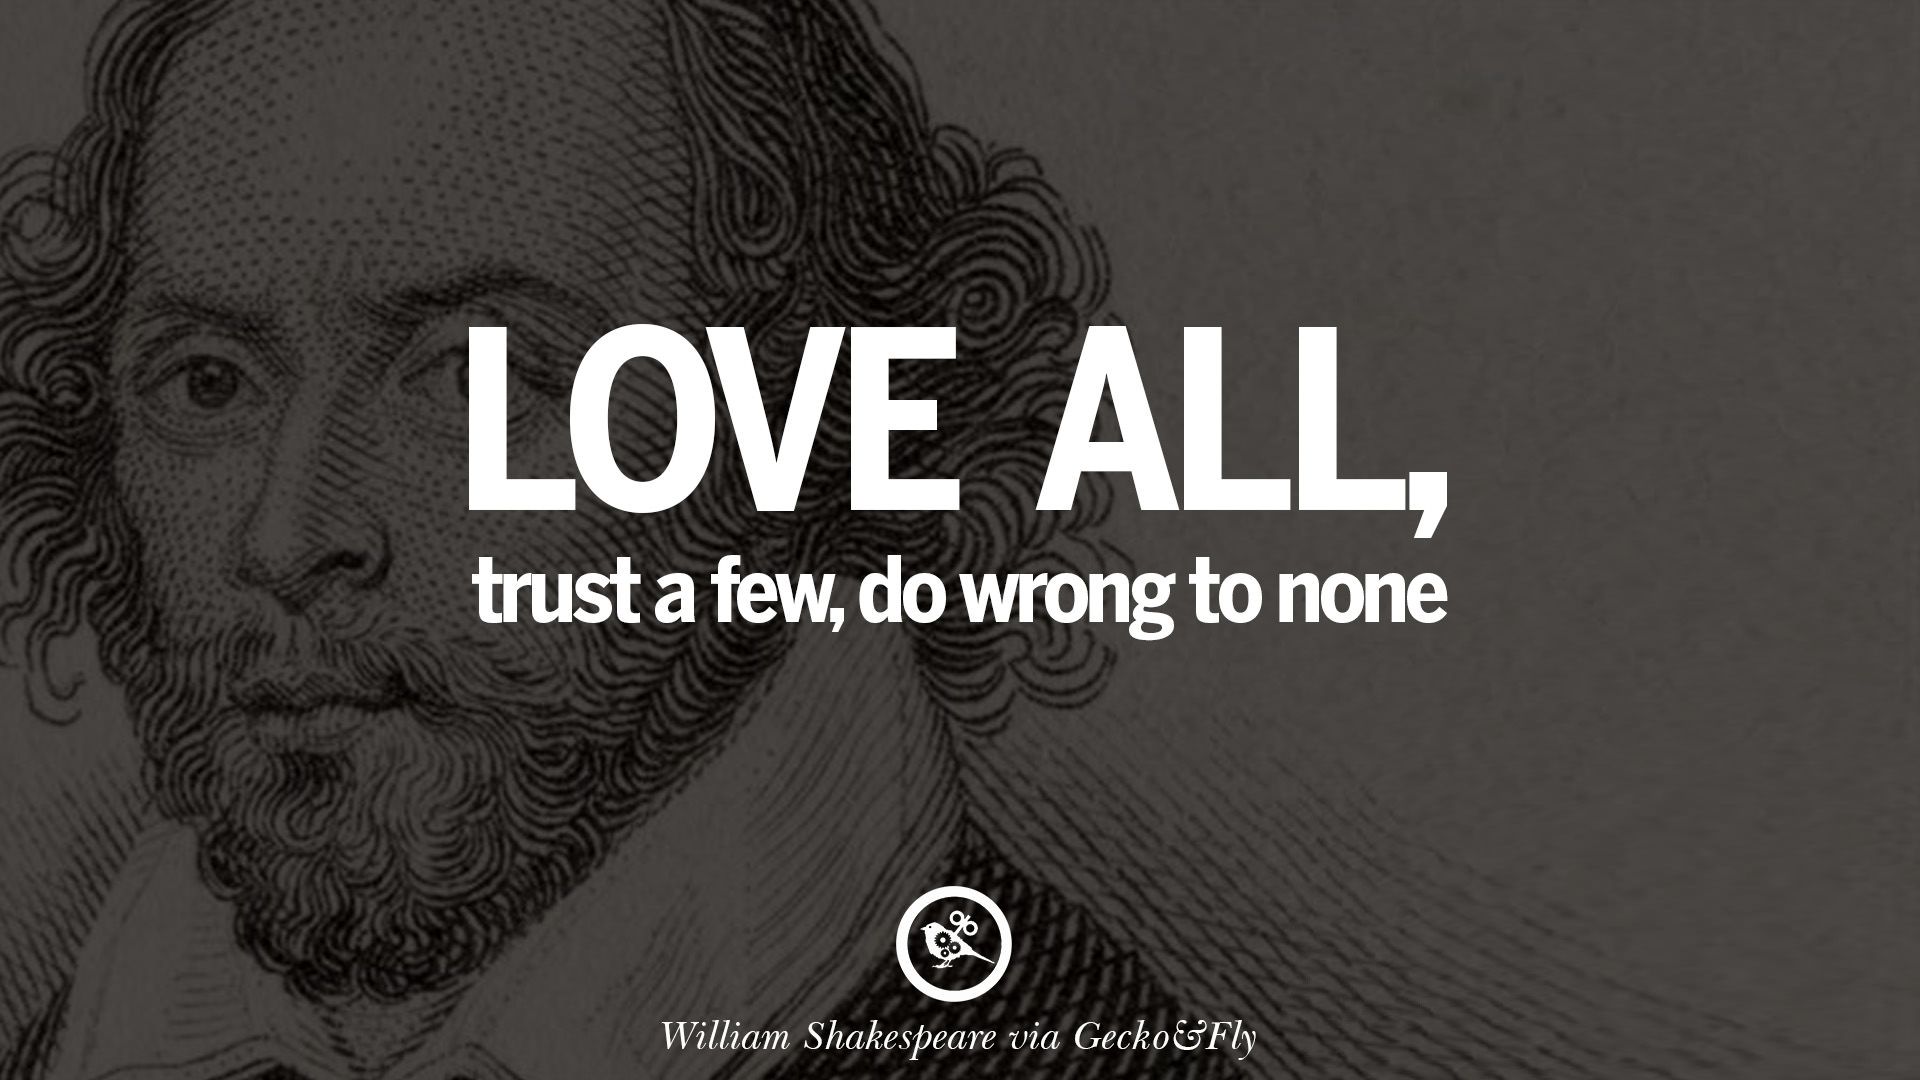 William Shakespeare Quotes About Love, Life, Friendship and Death